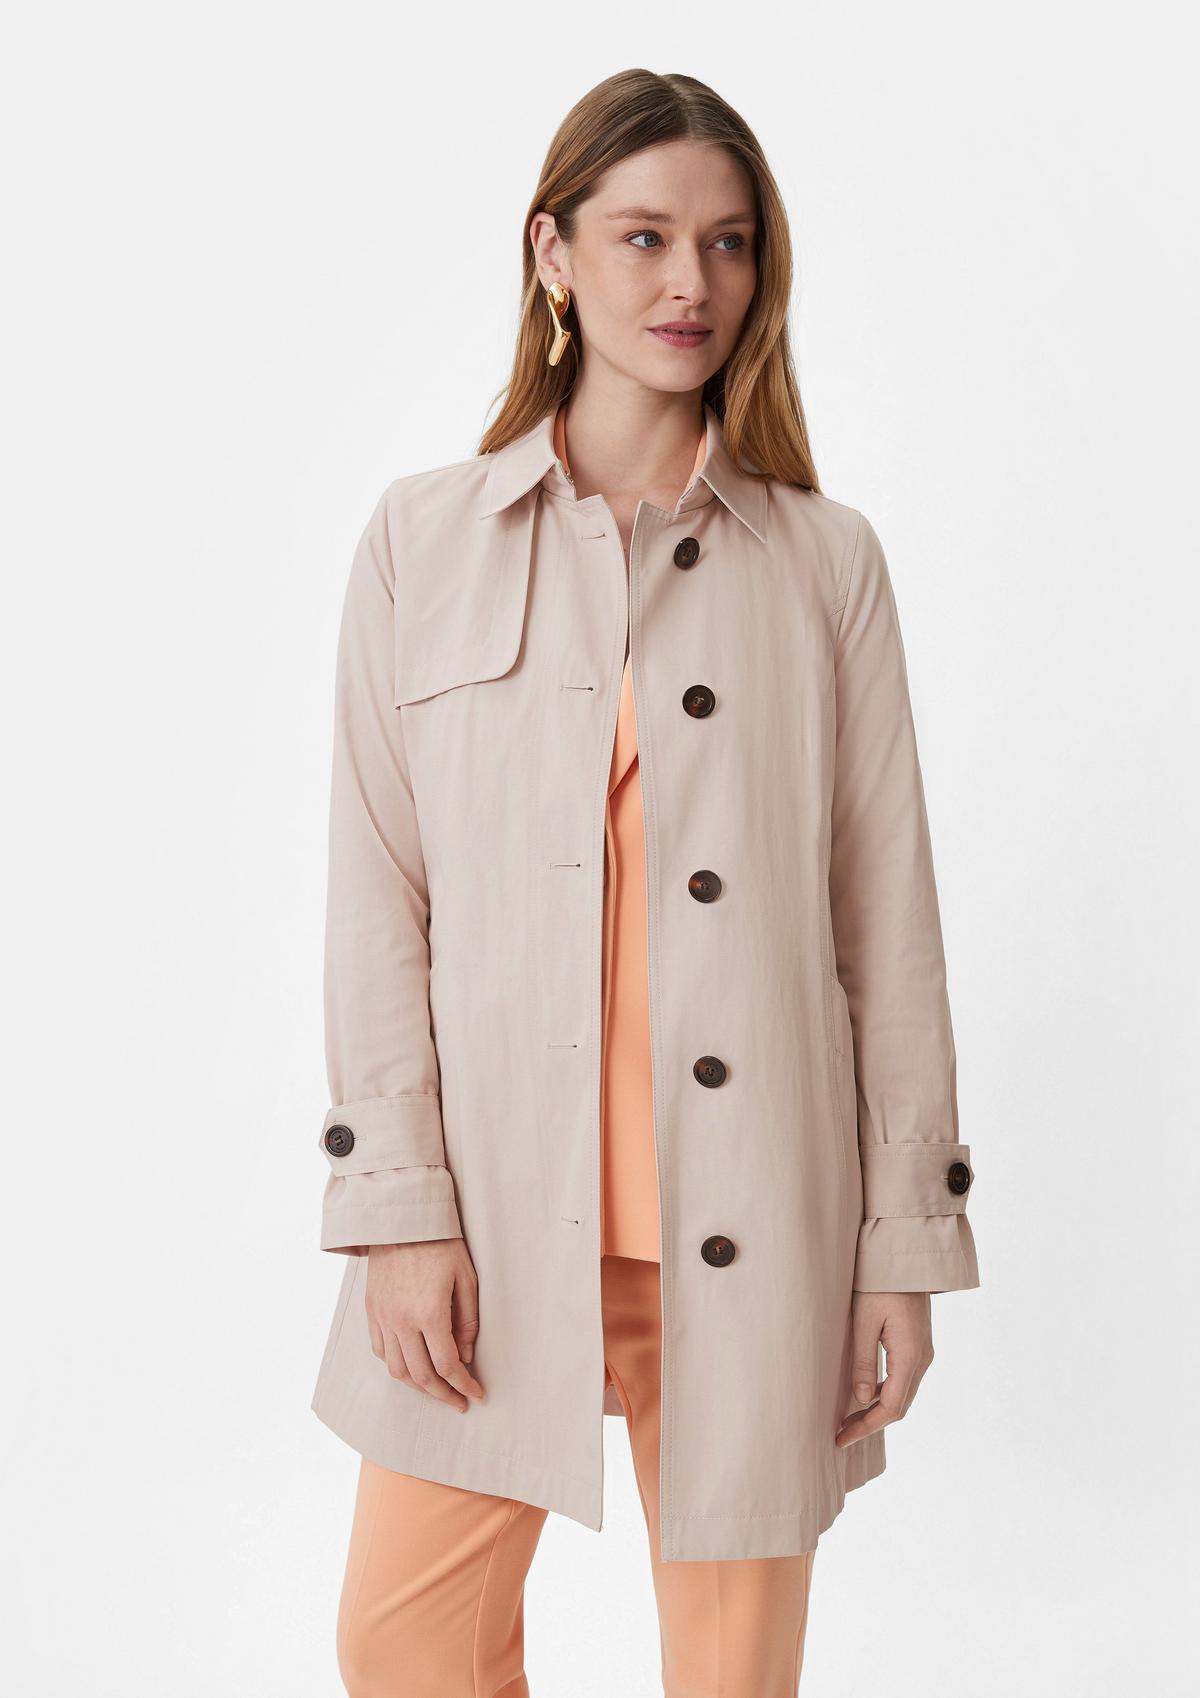 Fitted trench coat with a tie-around belt